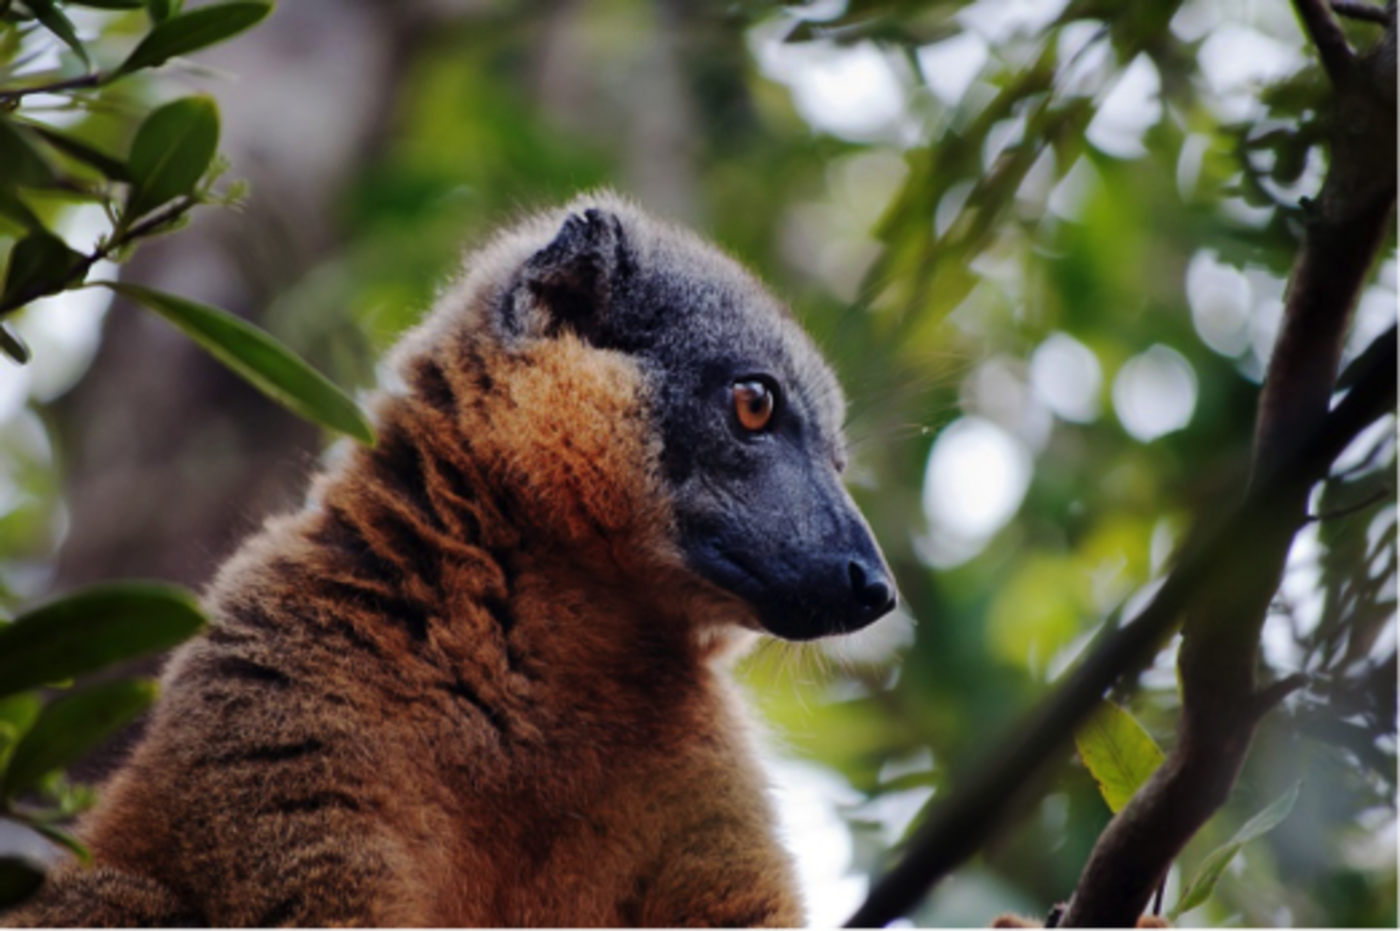 A close up of a Lemur in a tree